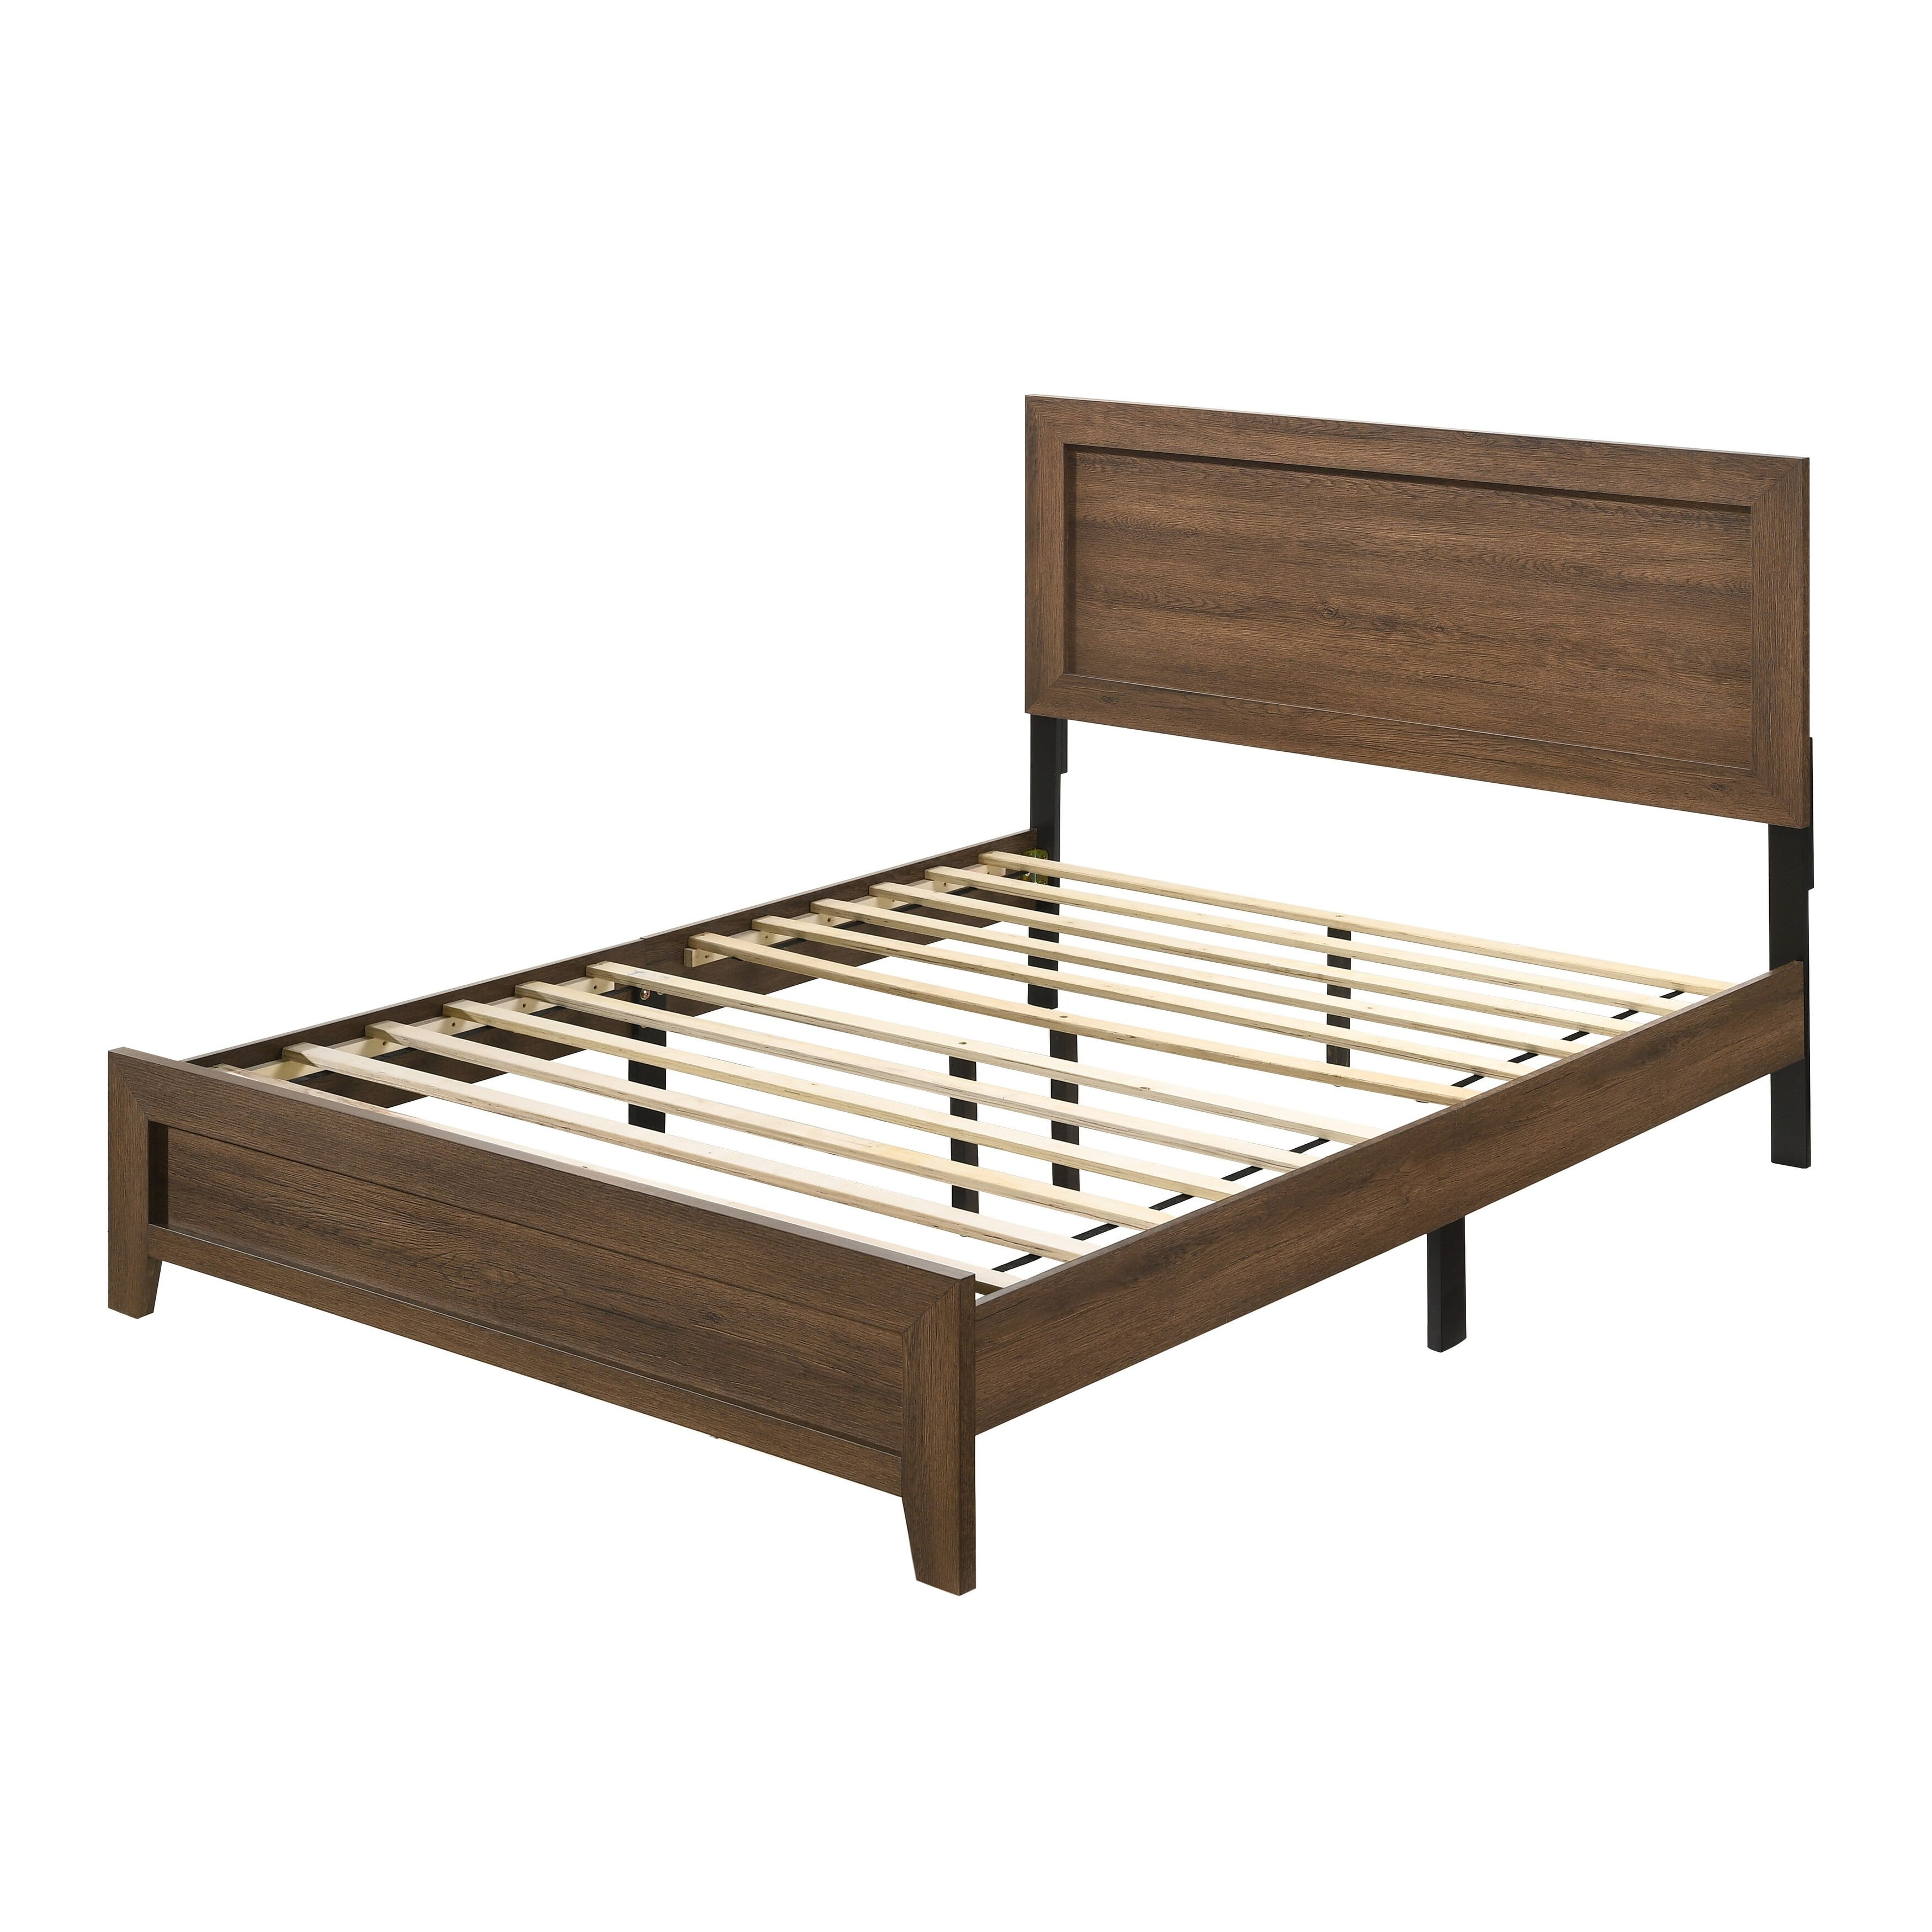 Picture of ACME Furniture 28047EK 84 x 78 x 43 in. Miquell Eastern Bed, Oak - King Size